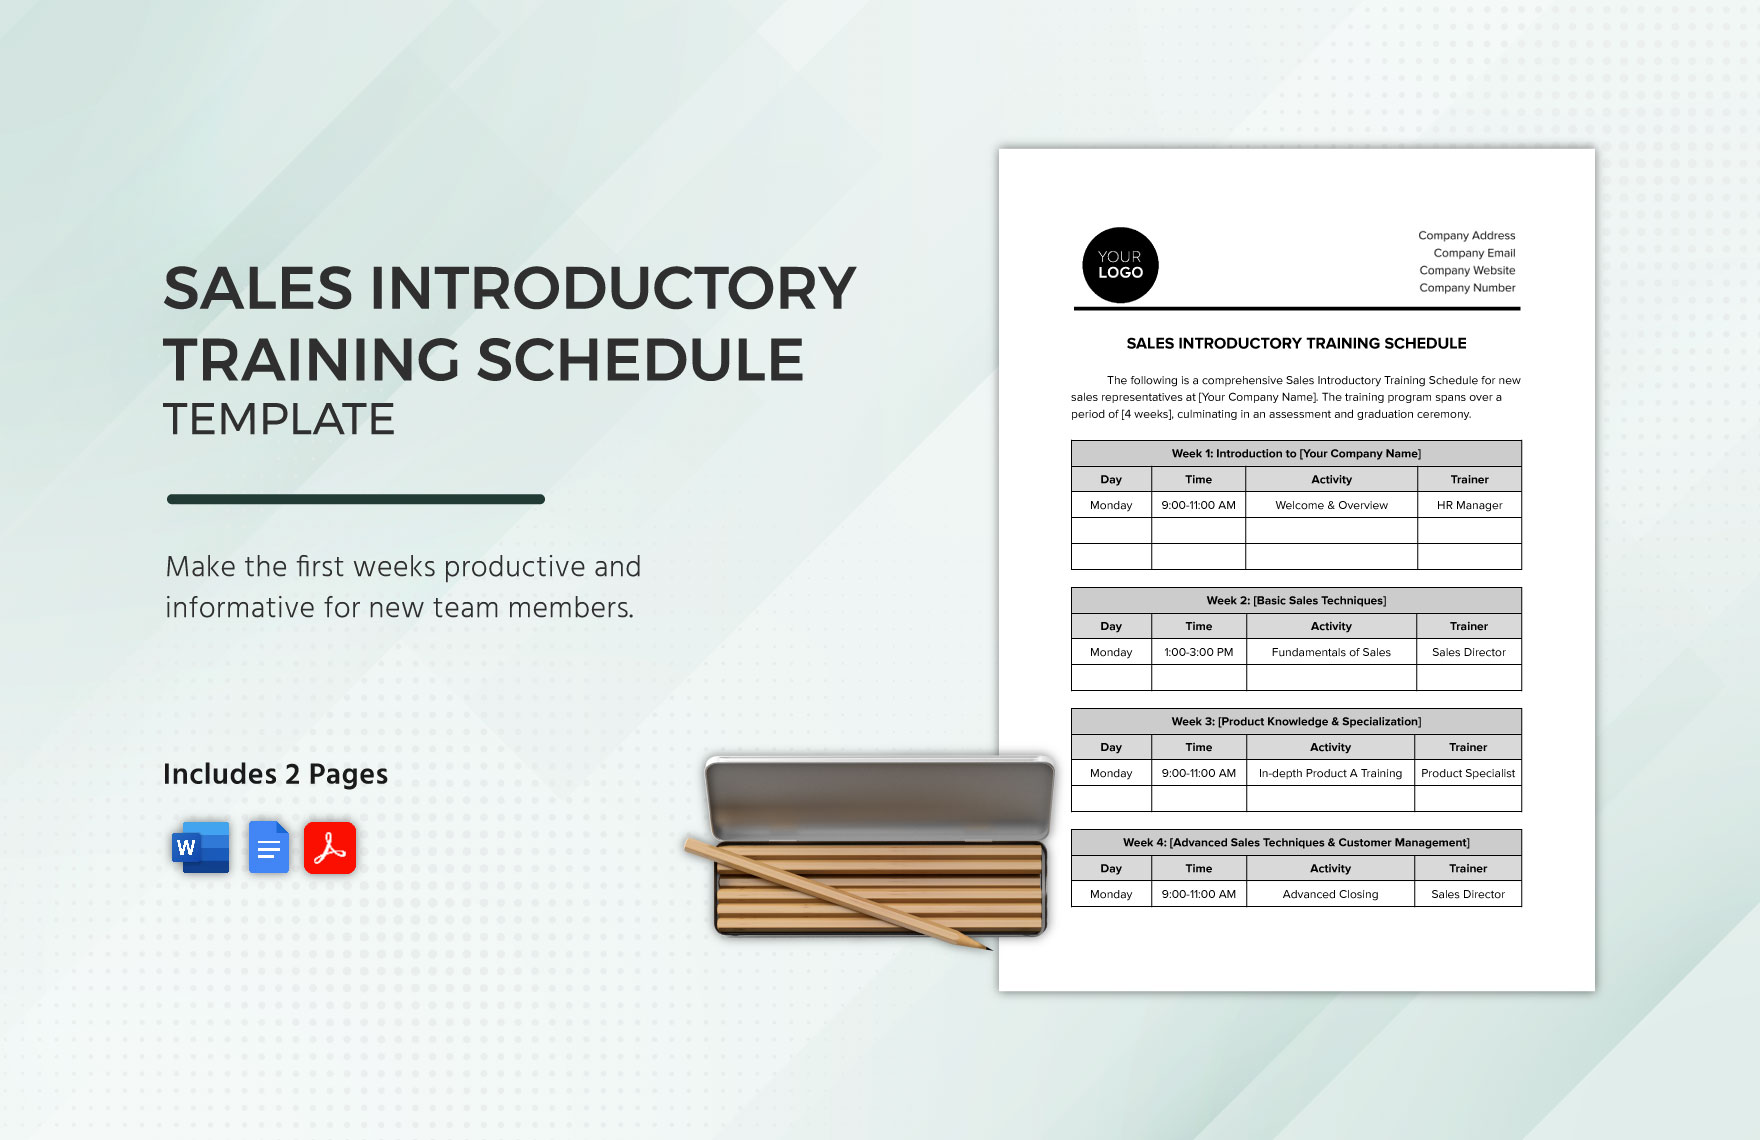 Sales Introductory Training Schedule Template